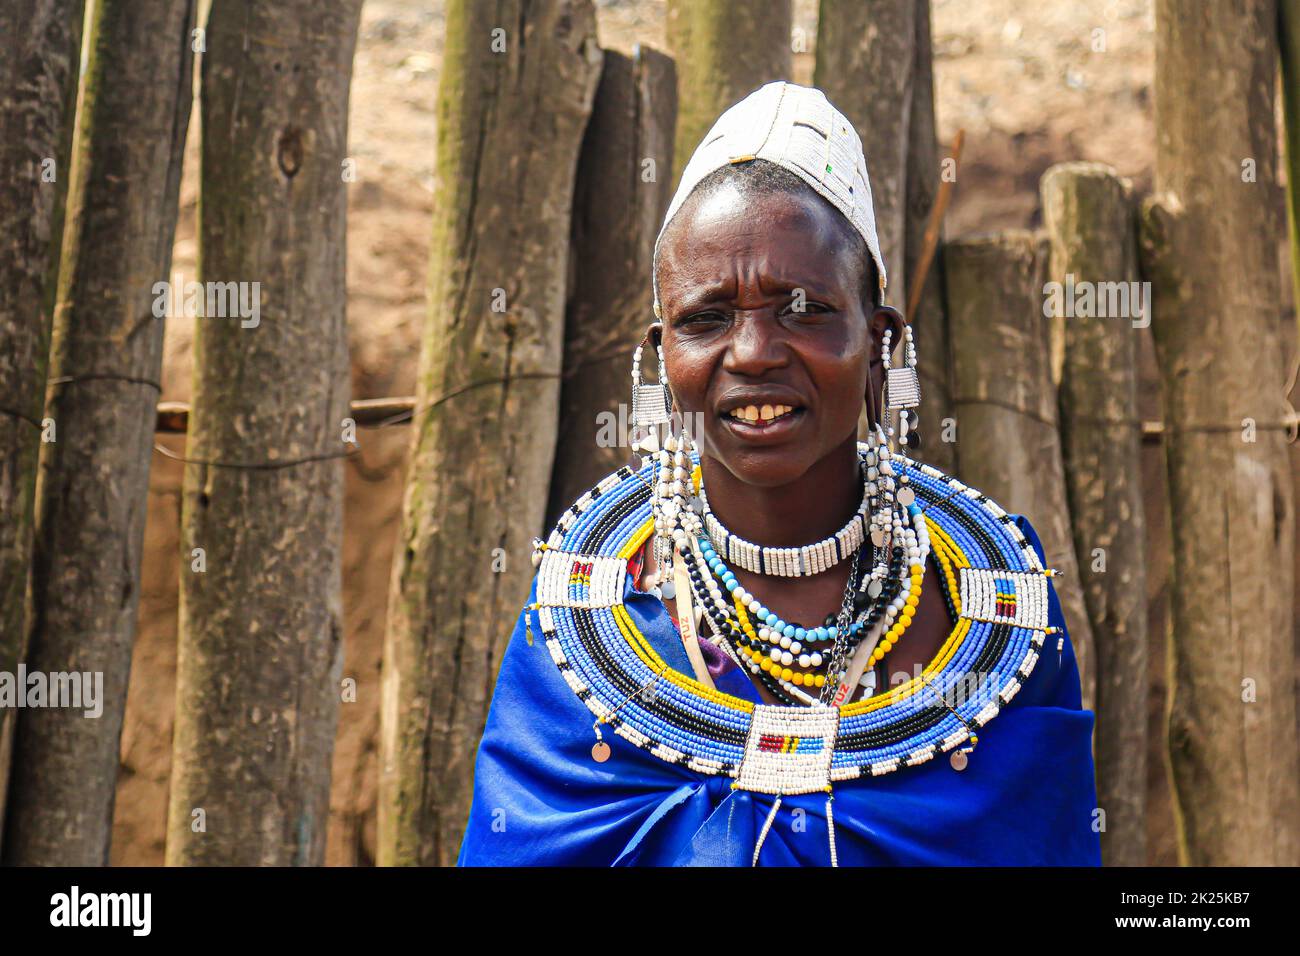 Ngorongoro Conservation Area, Tanzania - 7 November 2017: portrait of tribeswoman of a Masai tribe in a traditional village. Stock Photo